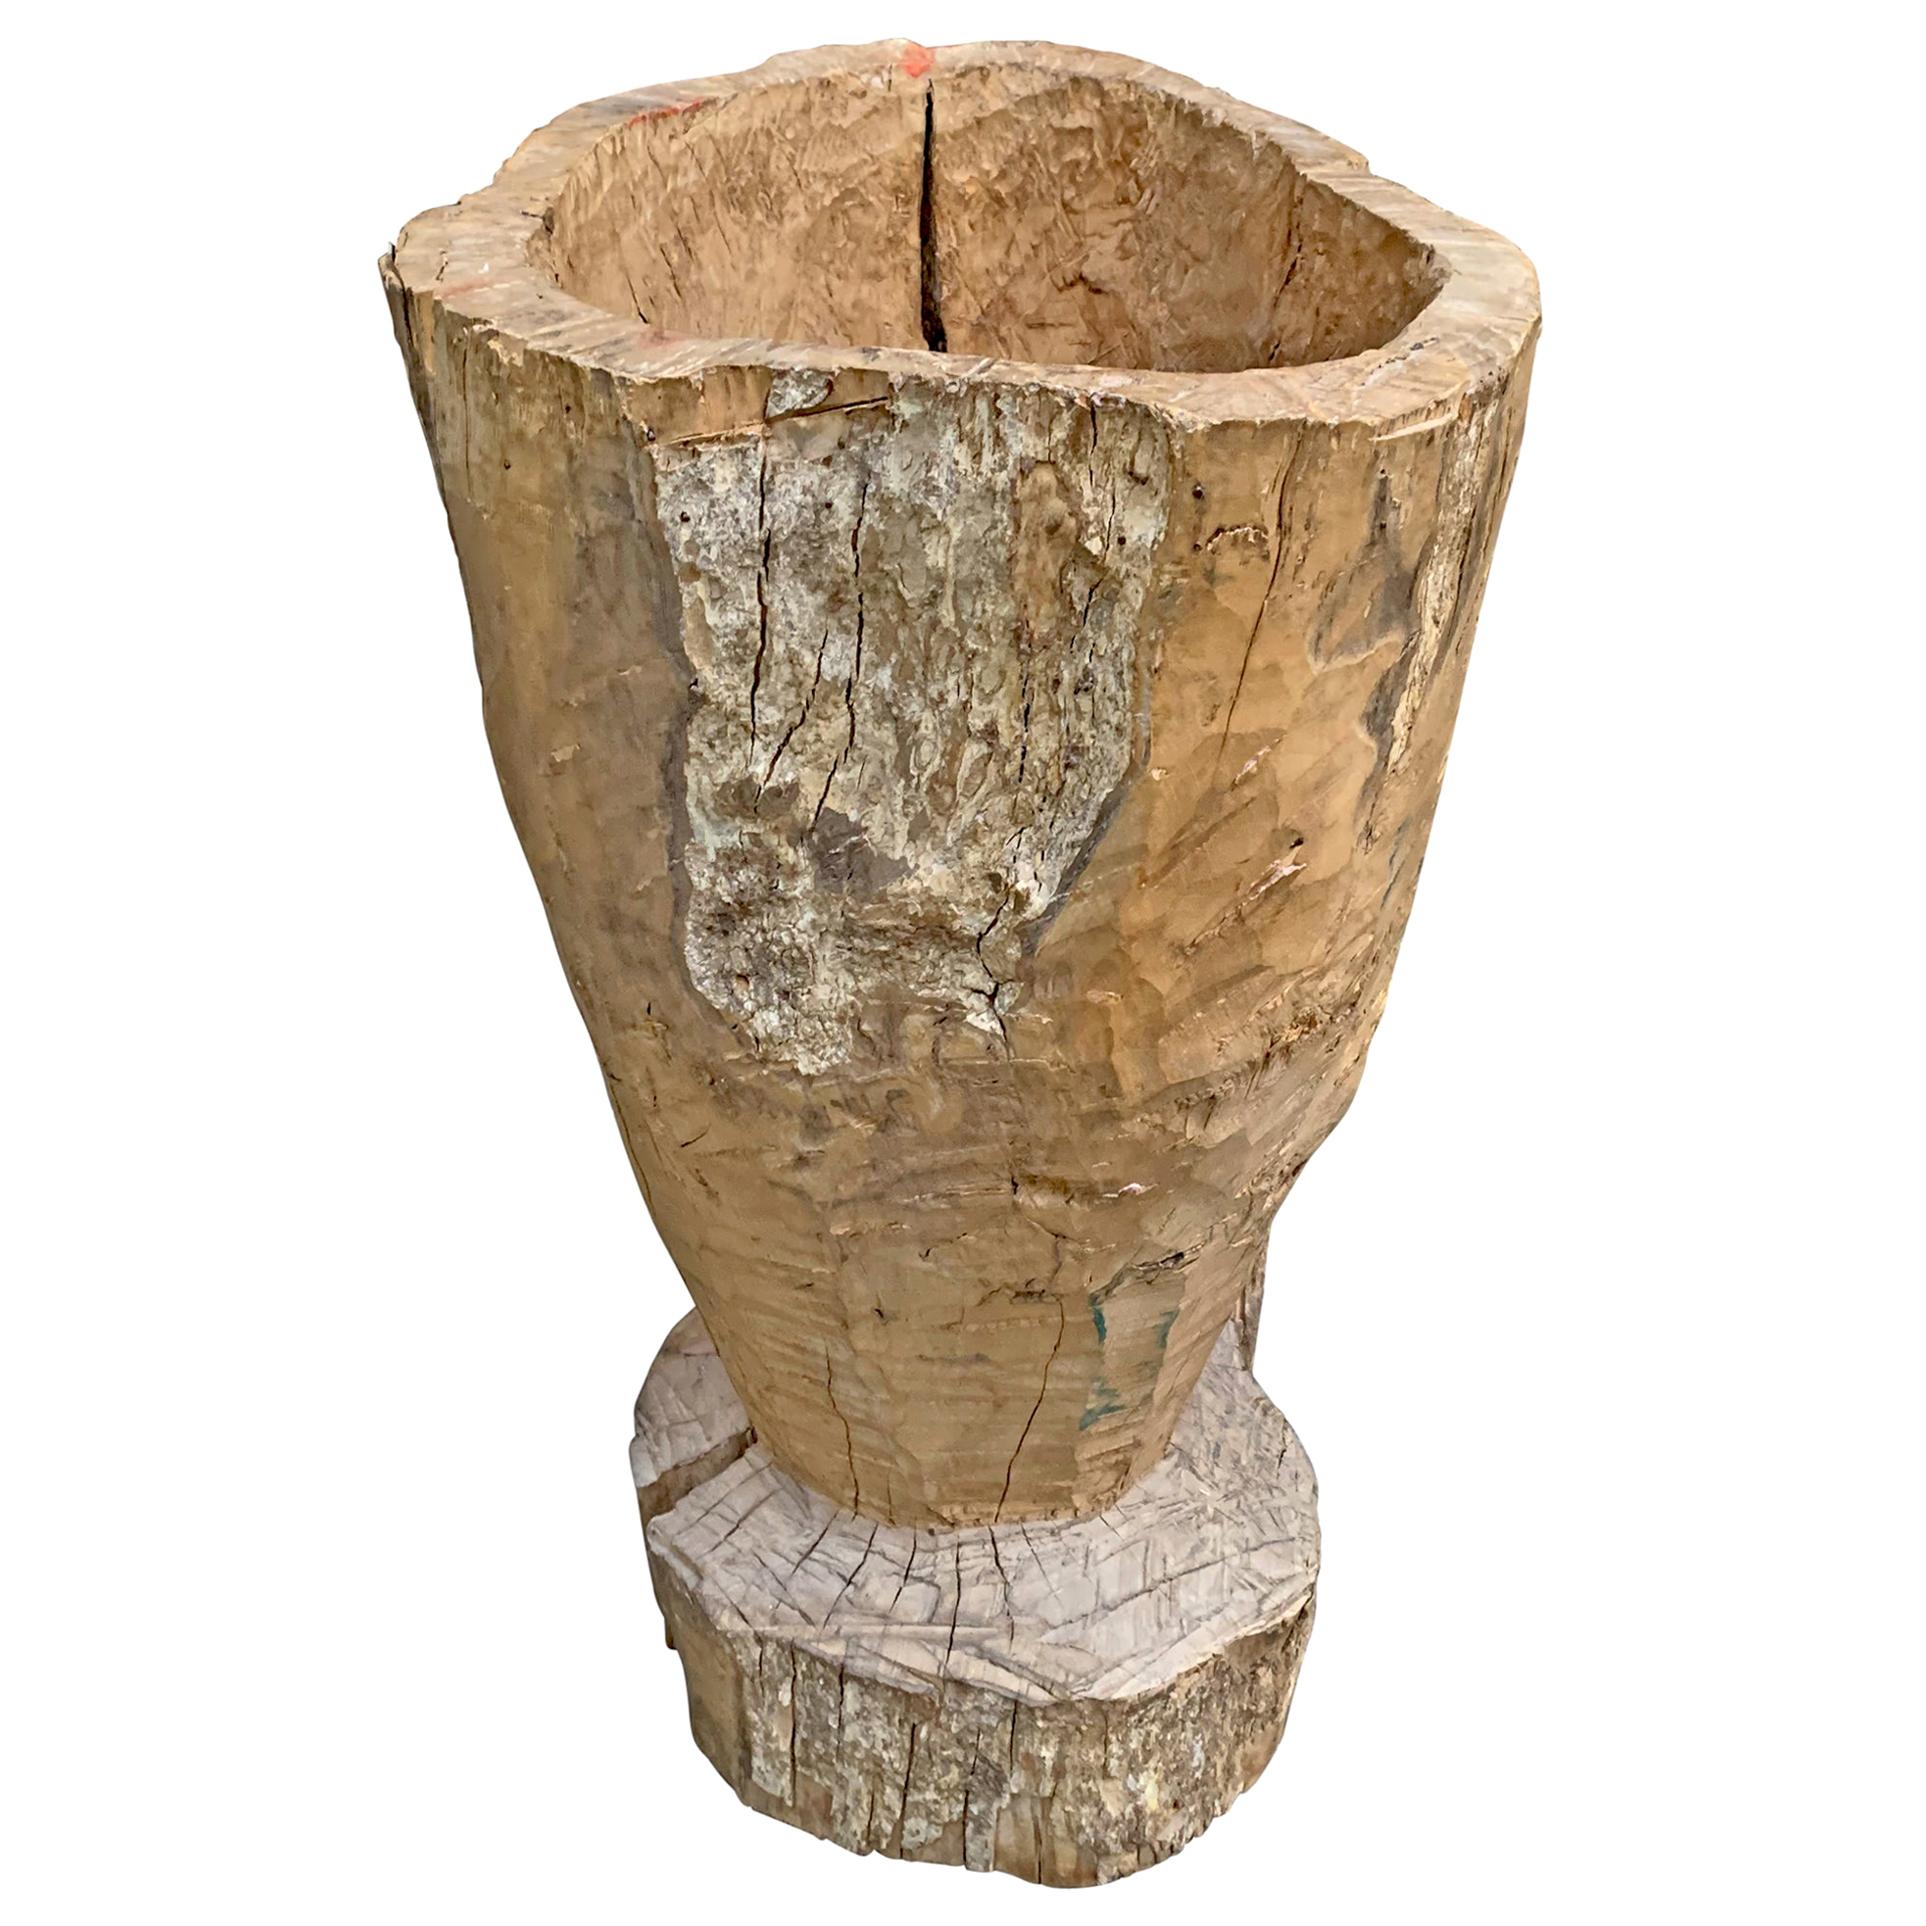 Large 19th Century Wooden Mortar